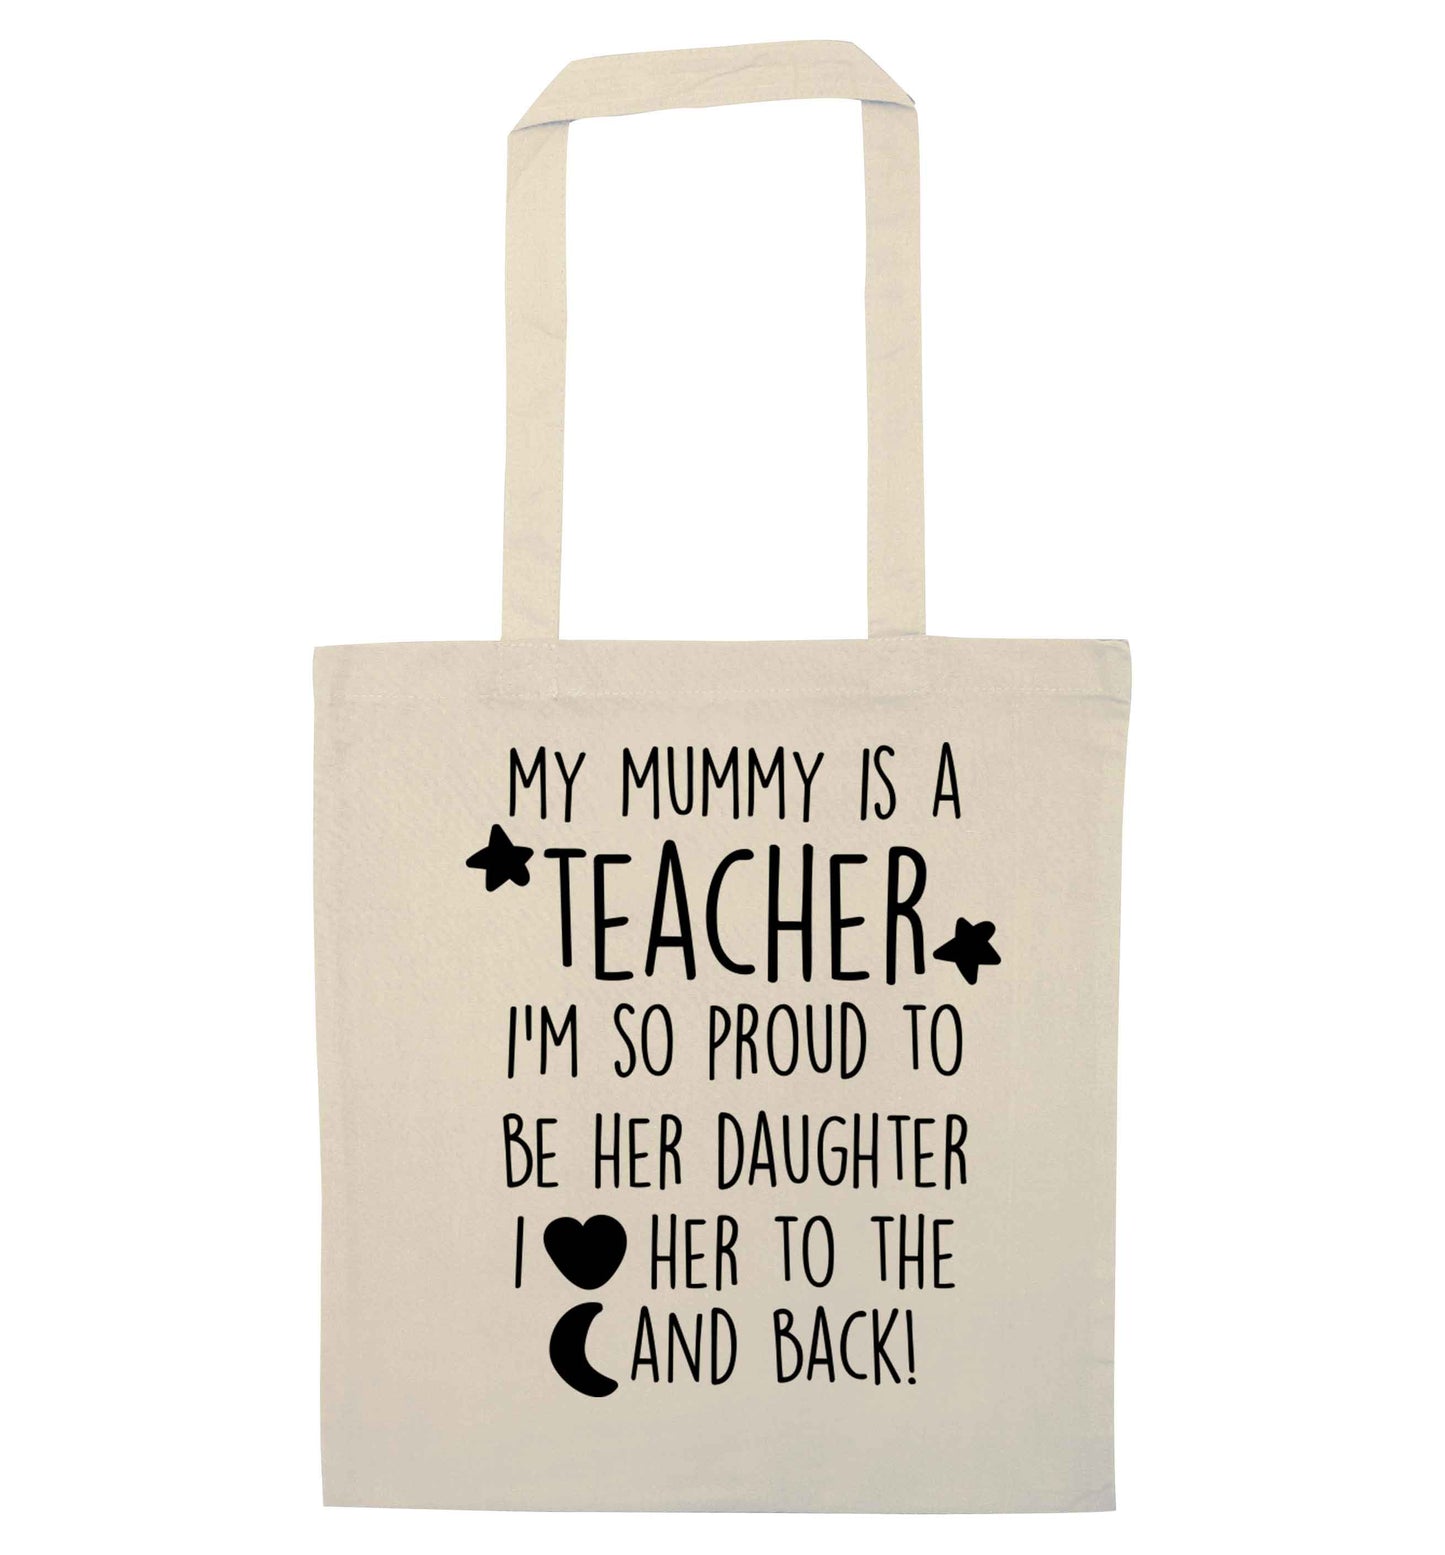 My mummy is a teacher I'm so proud to be her daughter I love her to the moon and back natural tote bag